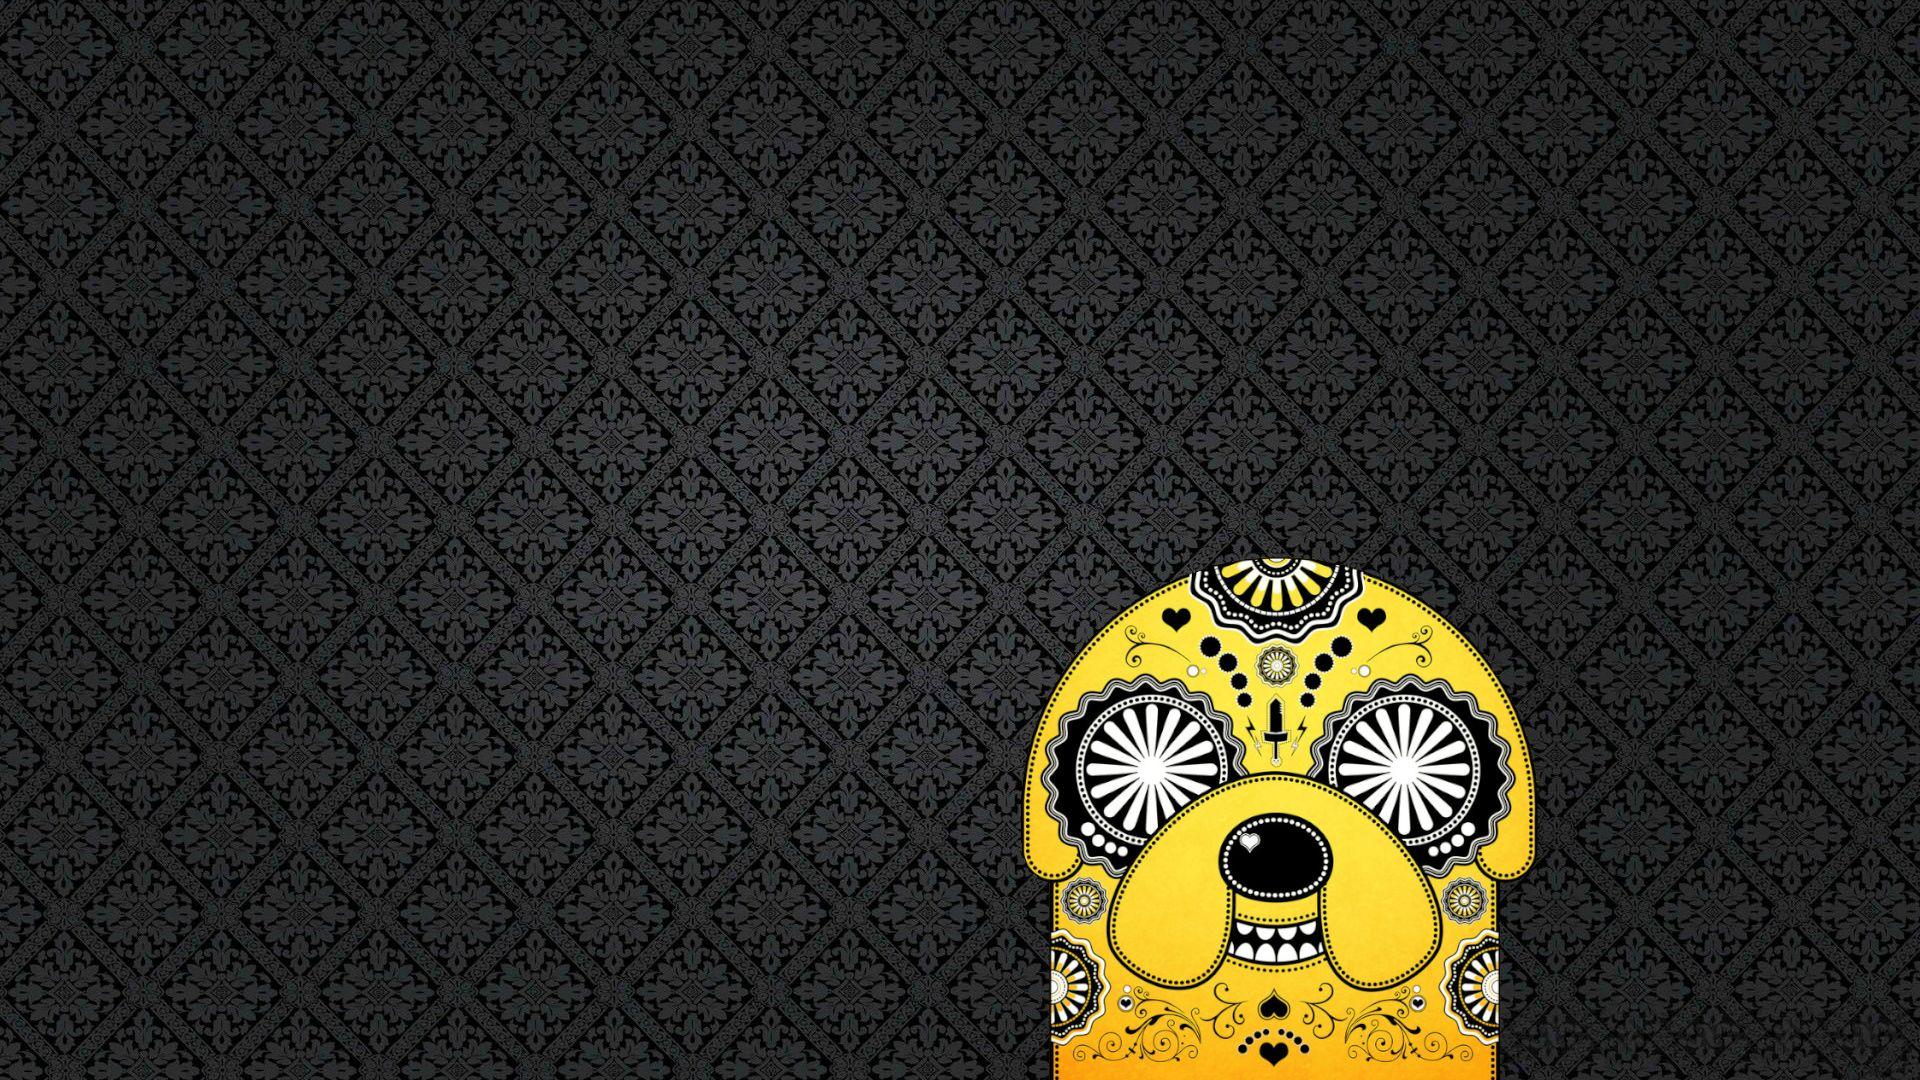 Download Jake the Dog with Sick Patterns [1920x1080] [Requested